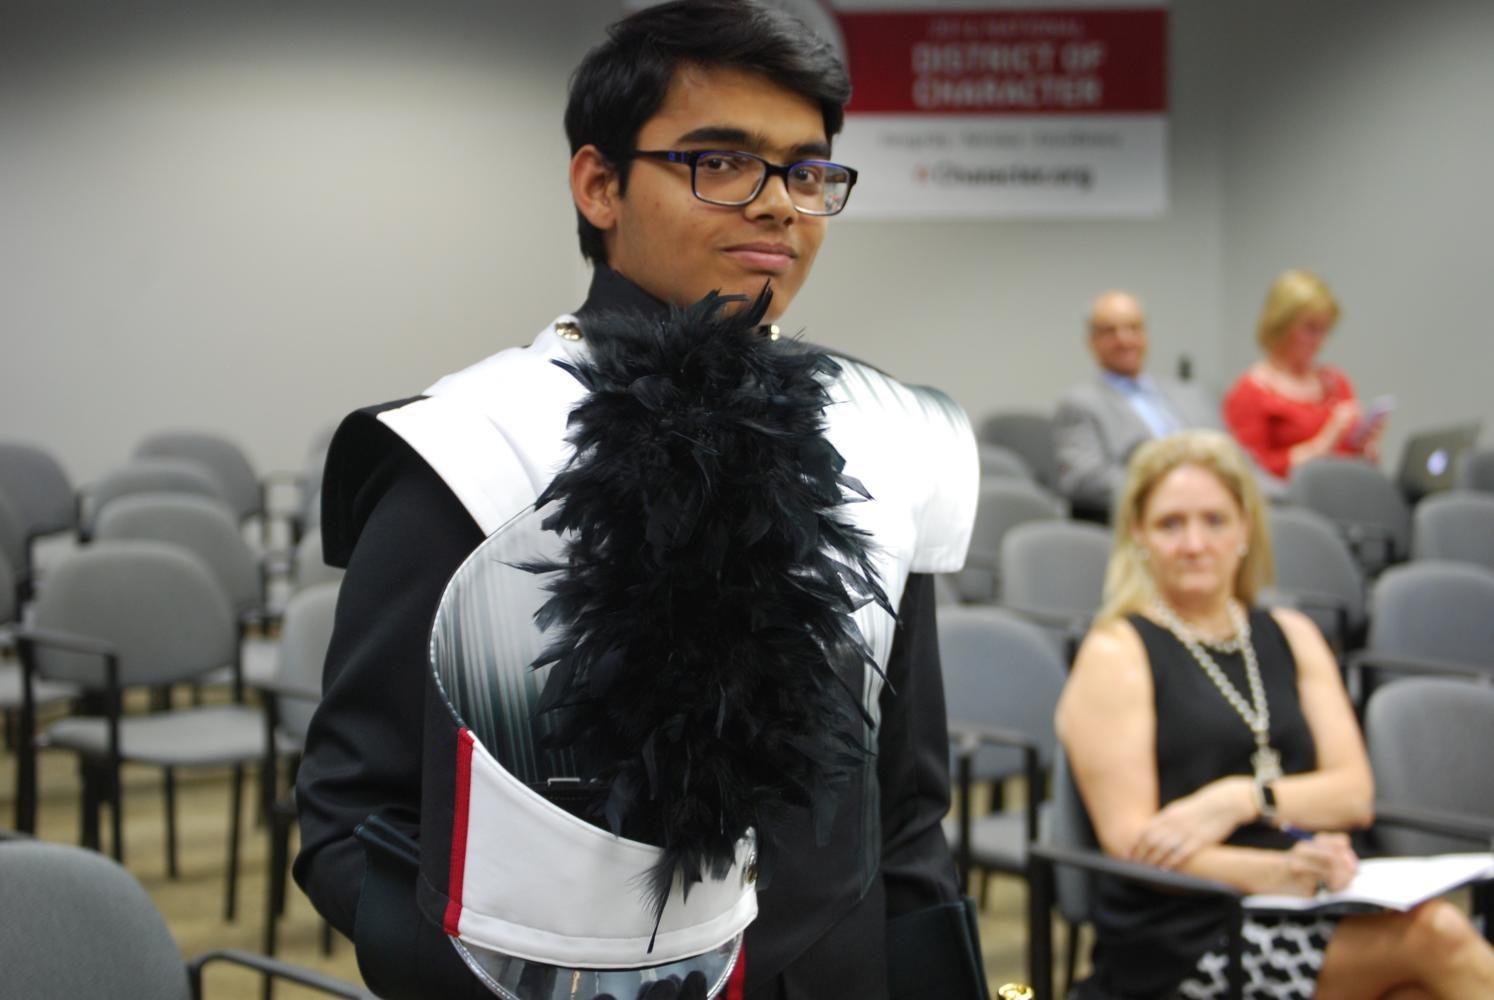 Coppell High School junior Aditya Bhavikati models the new band uniforms approved during the CISD Board of Trustees meeting Monday night. The Board also approved the purchase of three new buses during the meeting.